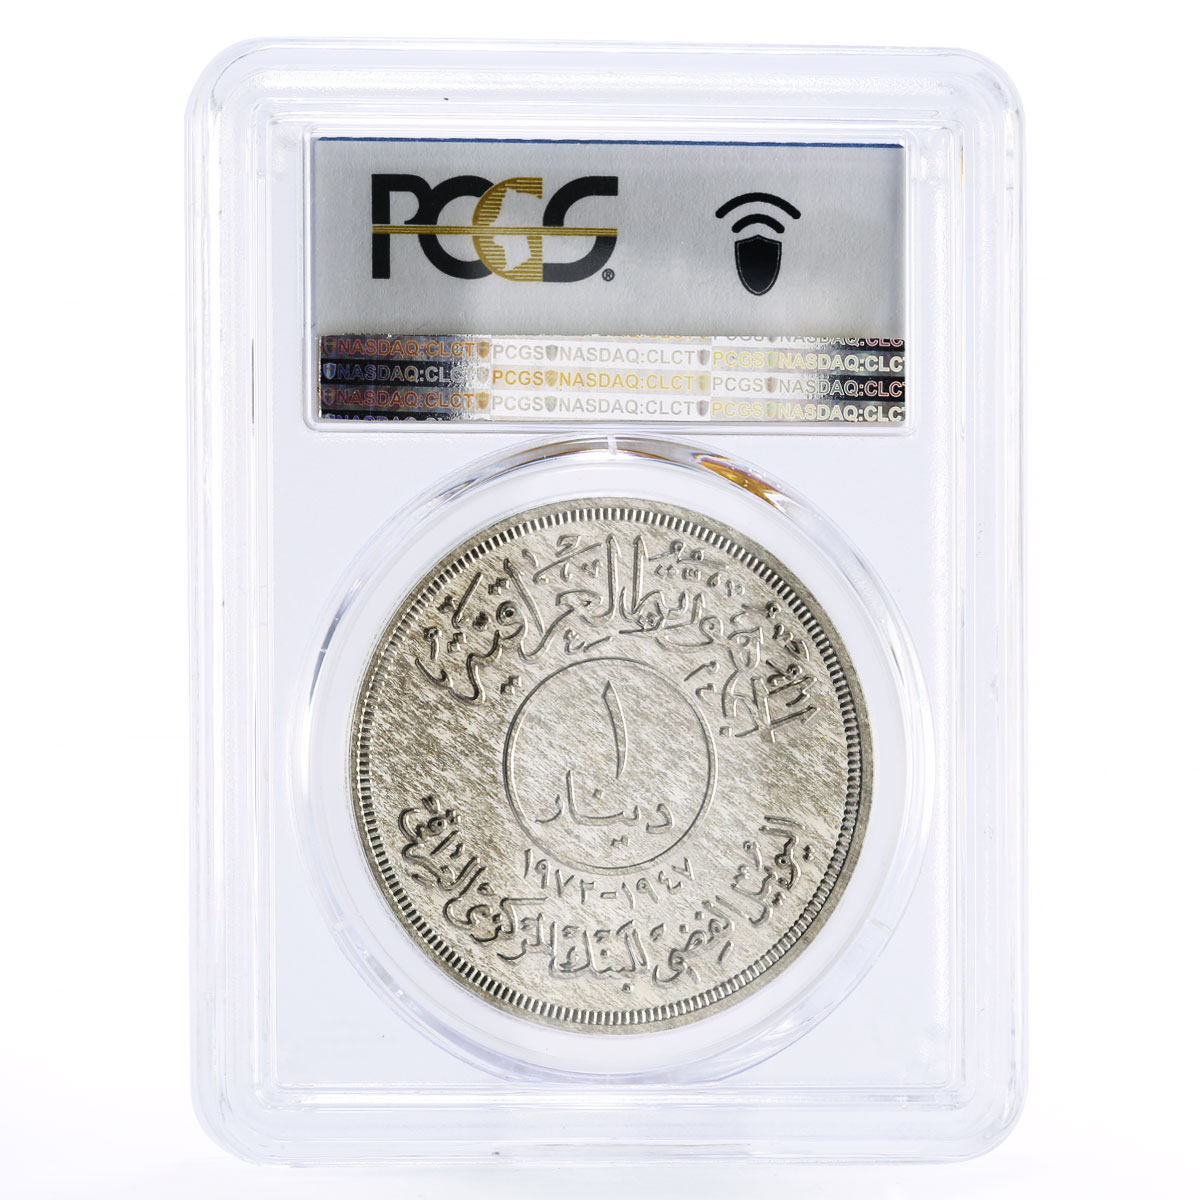 Iraq 1 dinar 25th Anniversary of Central Bank MS66 PCGS silver coin 1972